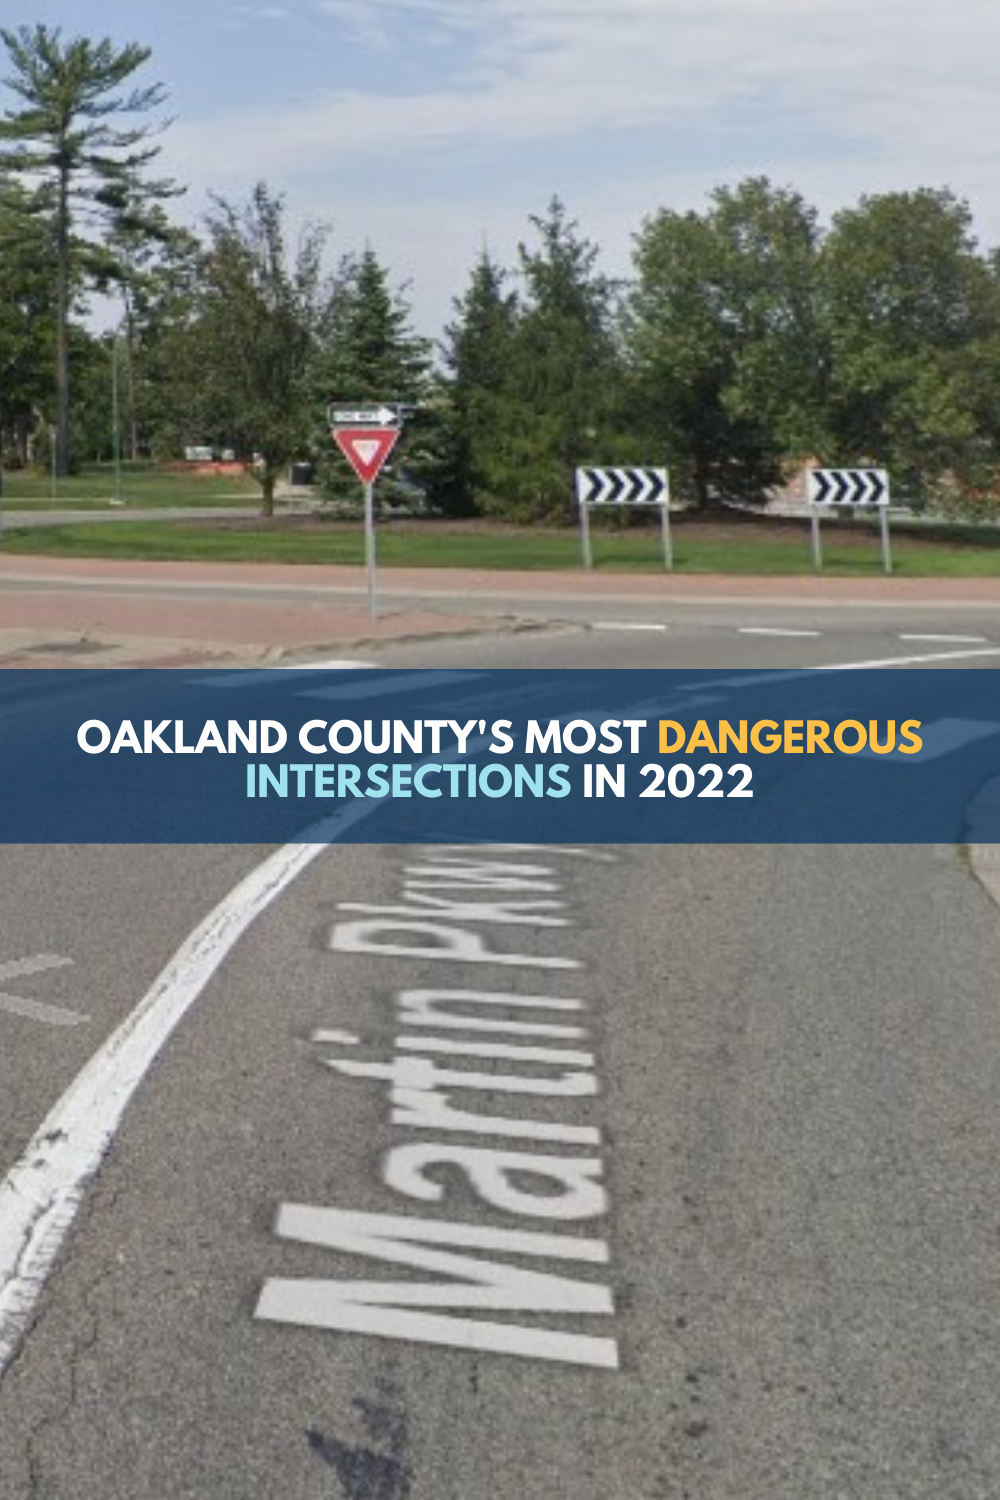 Oakland County’s Most Dangerous Intersections in 2022